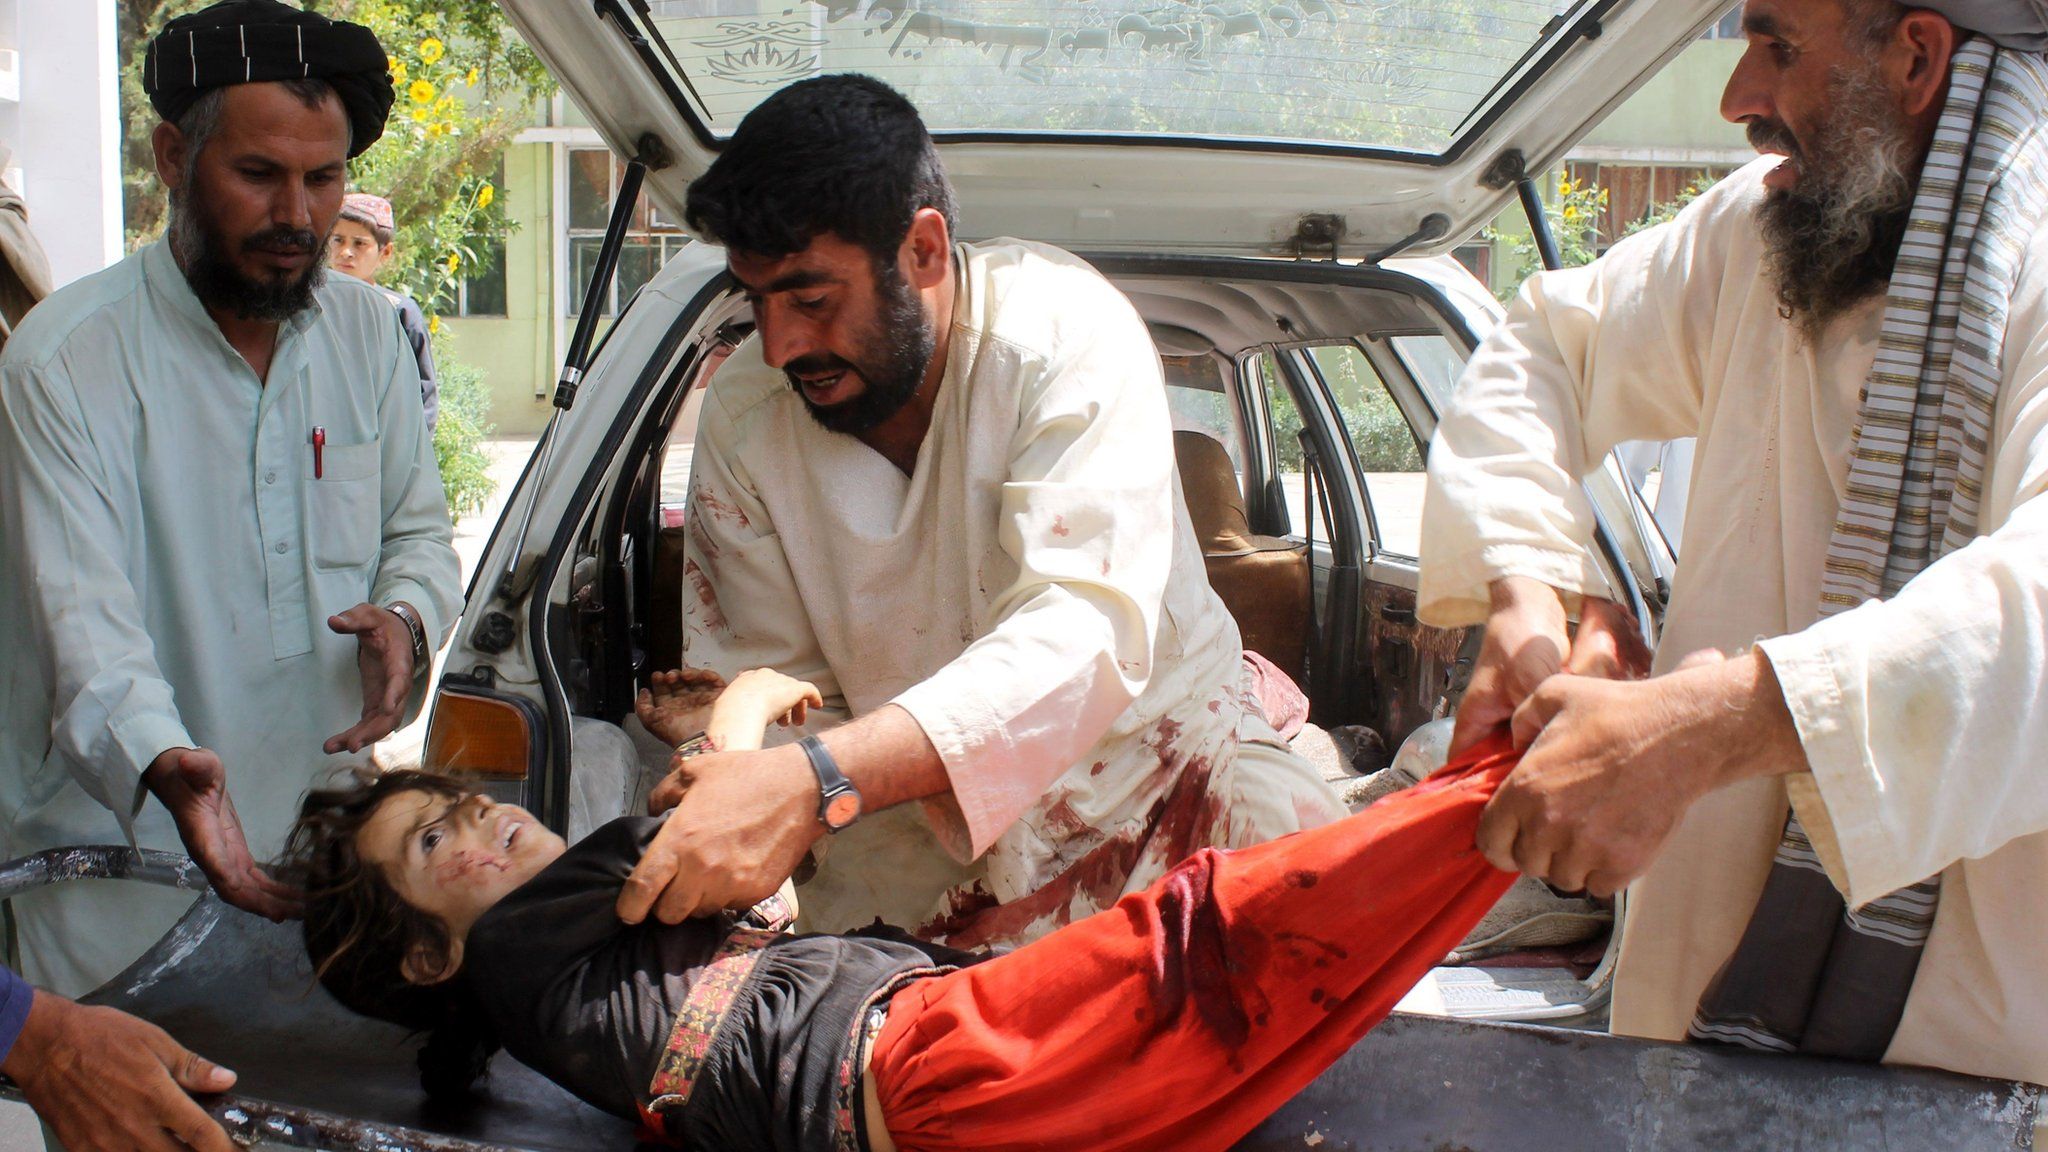 A wounded Afghan child being brought to a hospital after being injured in a mortar explosion in Kandahar on 1 July 2015